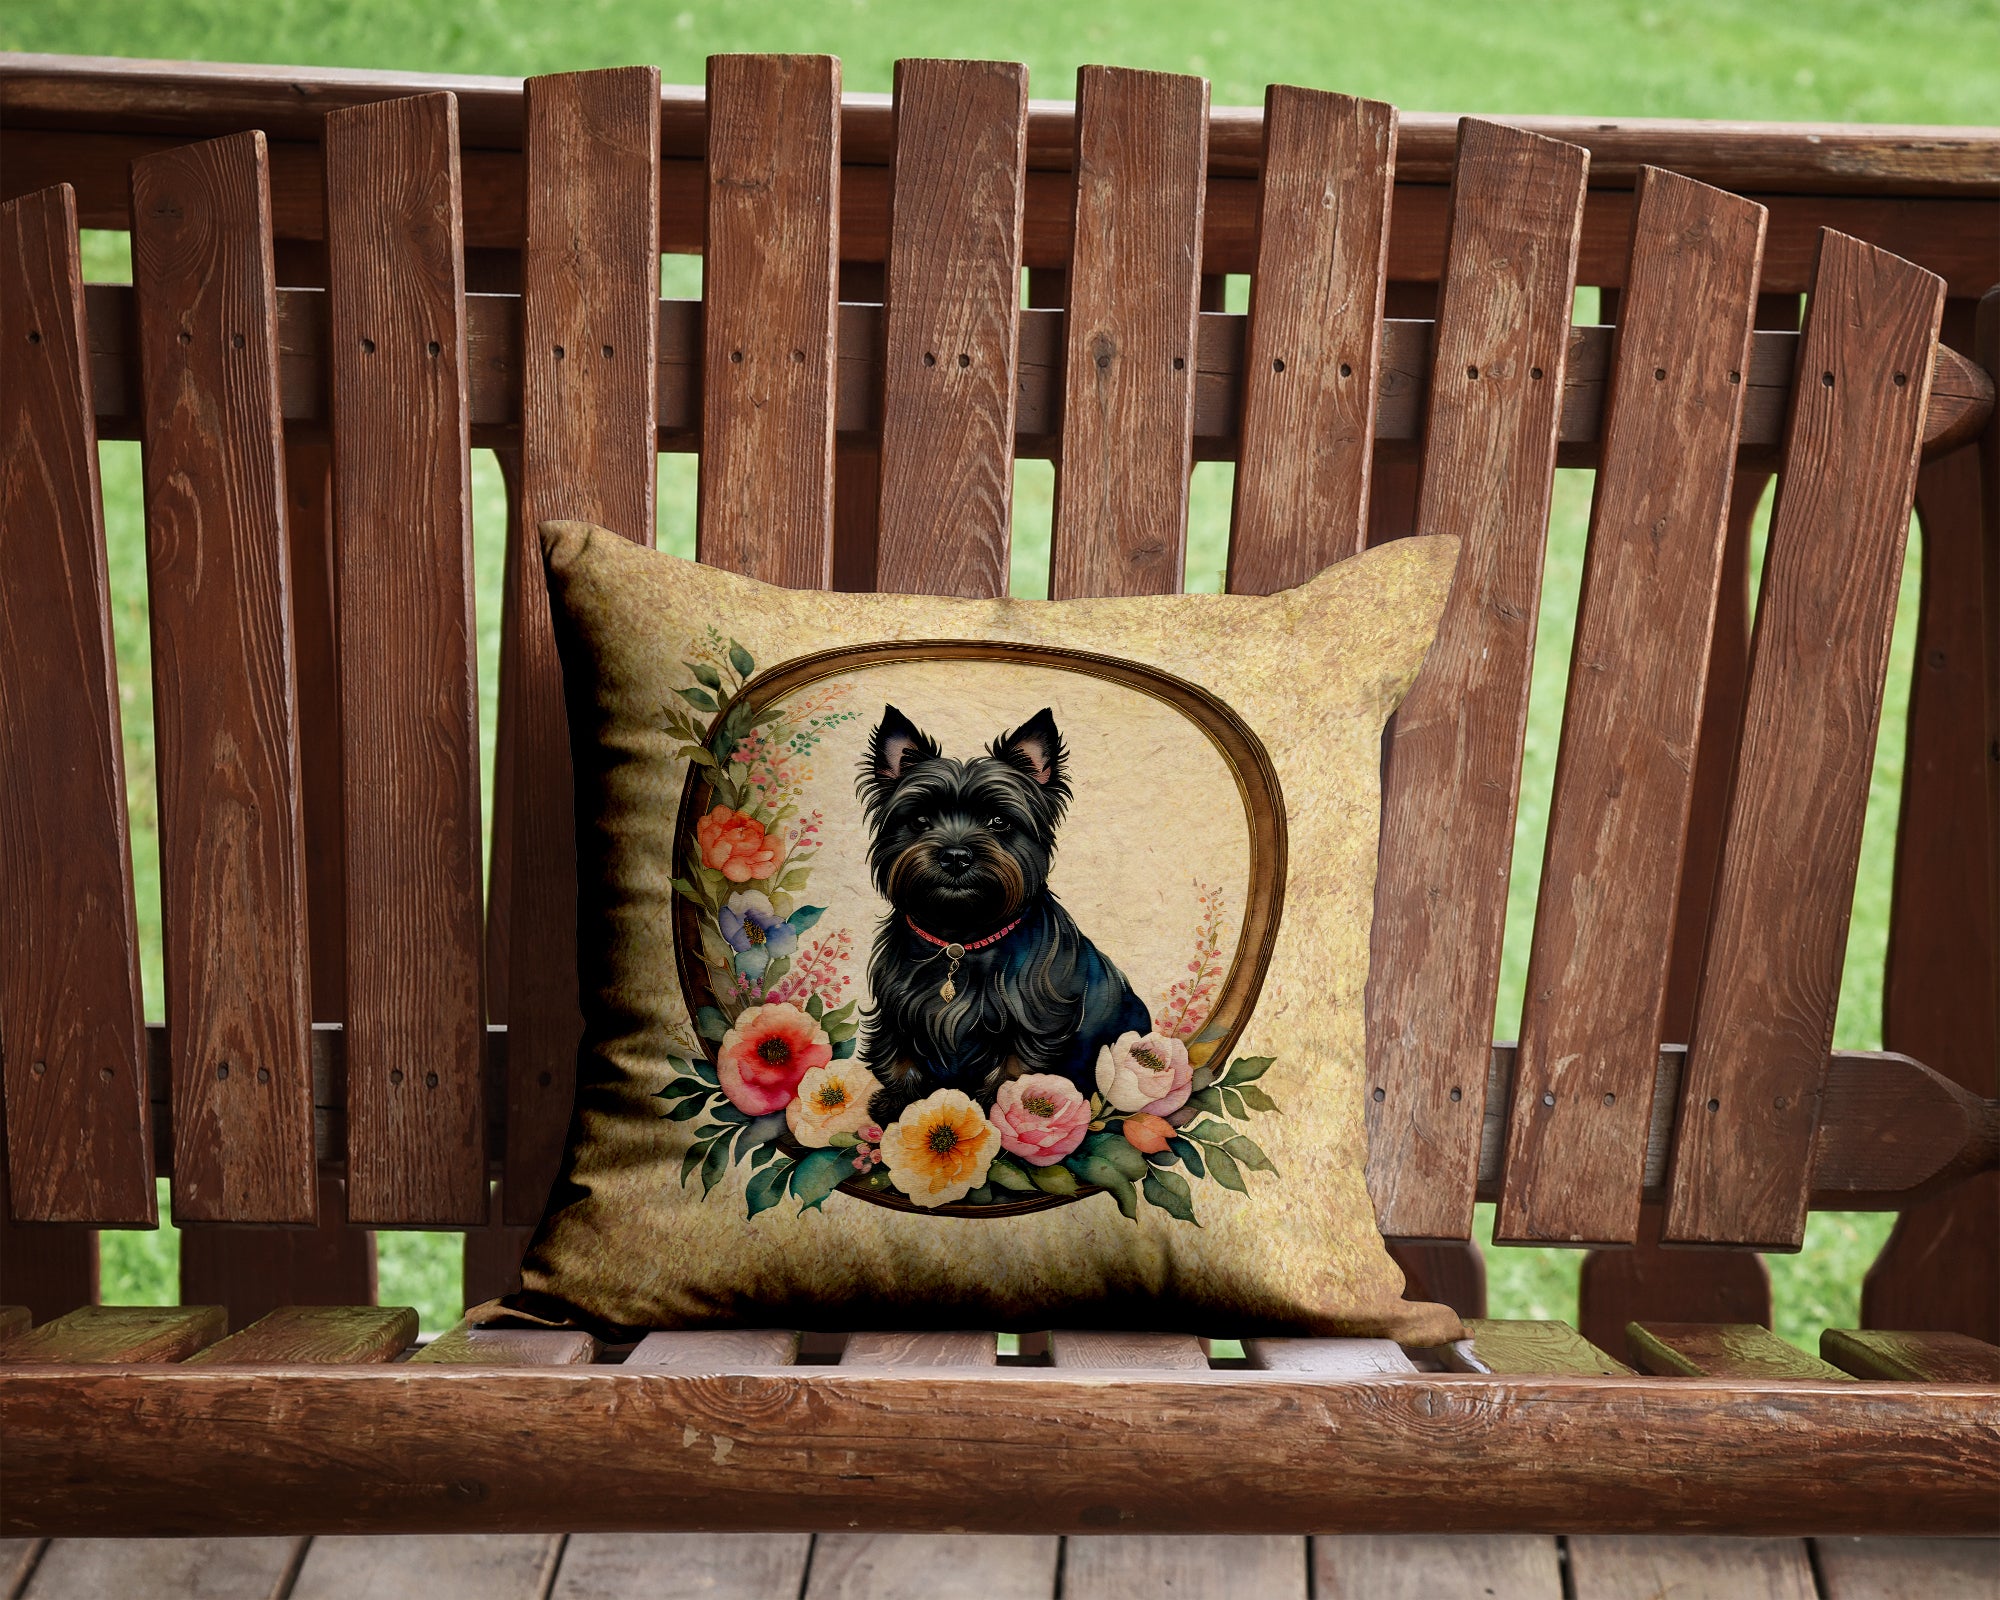 Buy this Cairn Terrier and Flowers Fabric Decorative Pillow